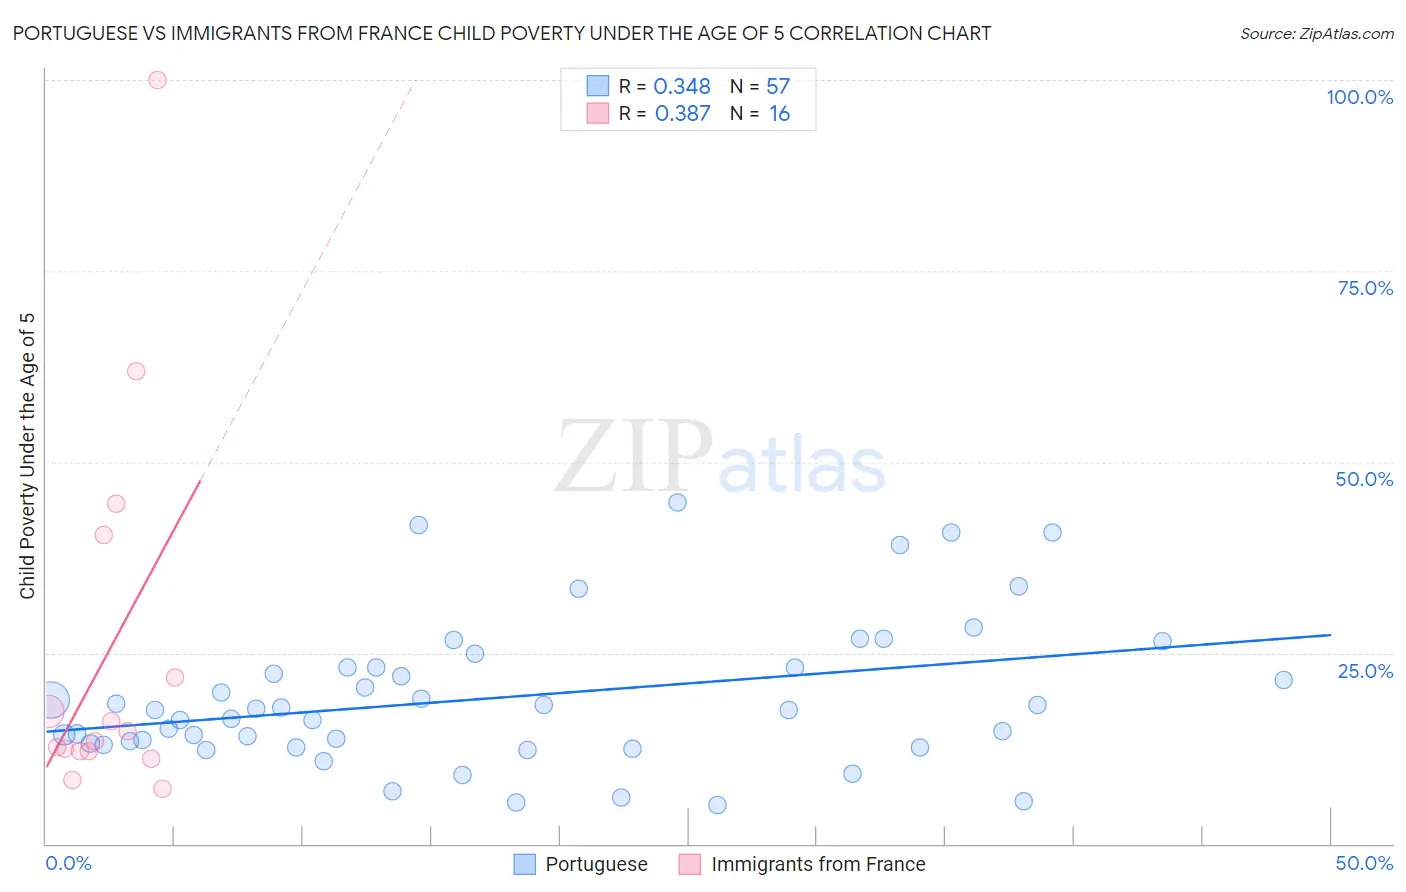 Portuguese vs Immigrants from France Child Poverty Under the Age of 5